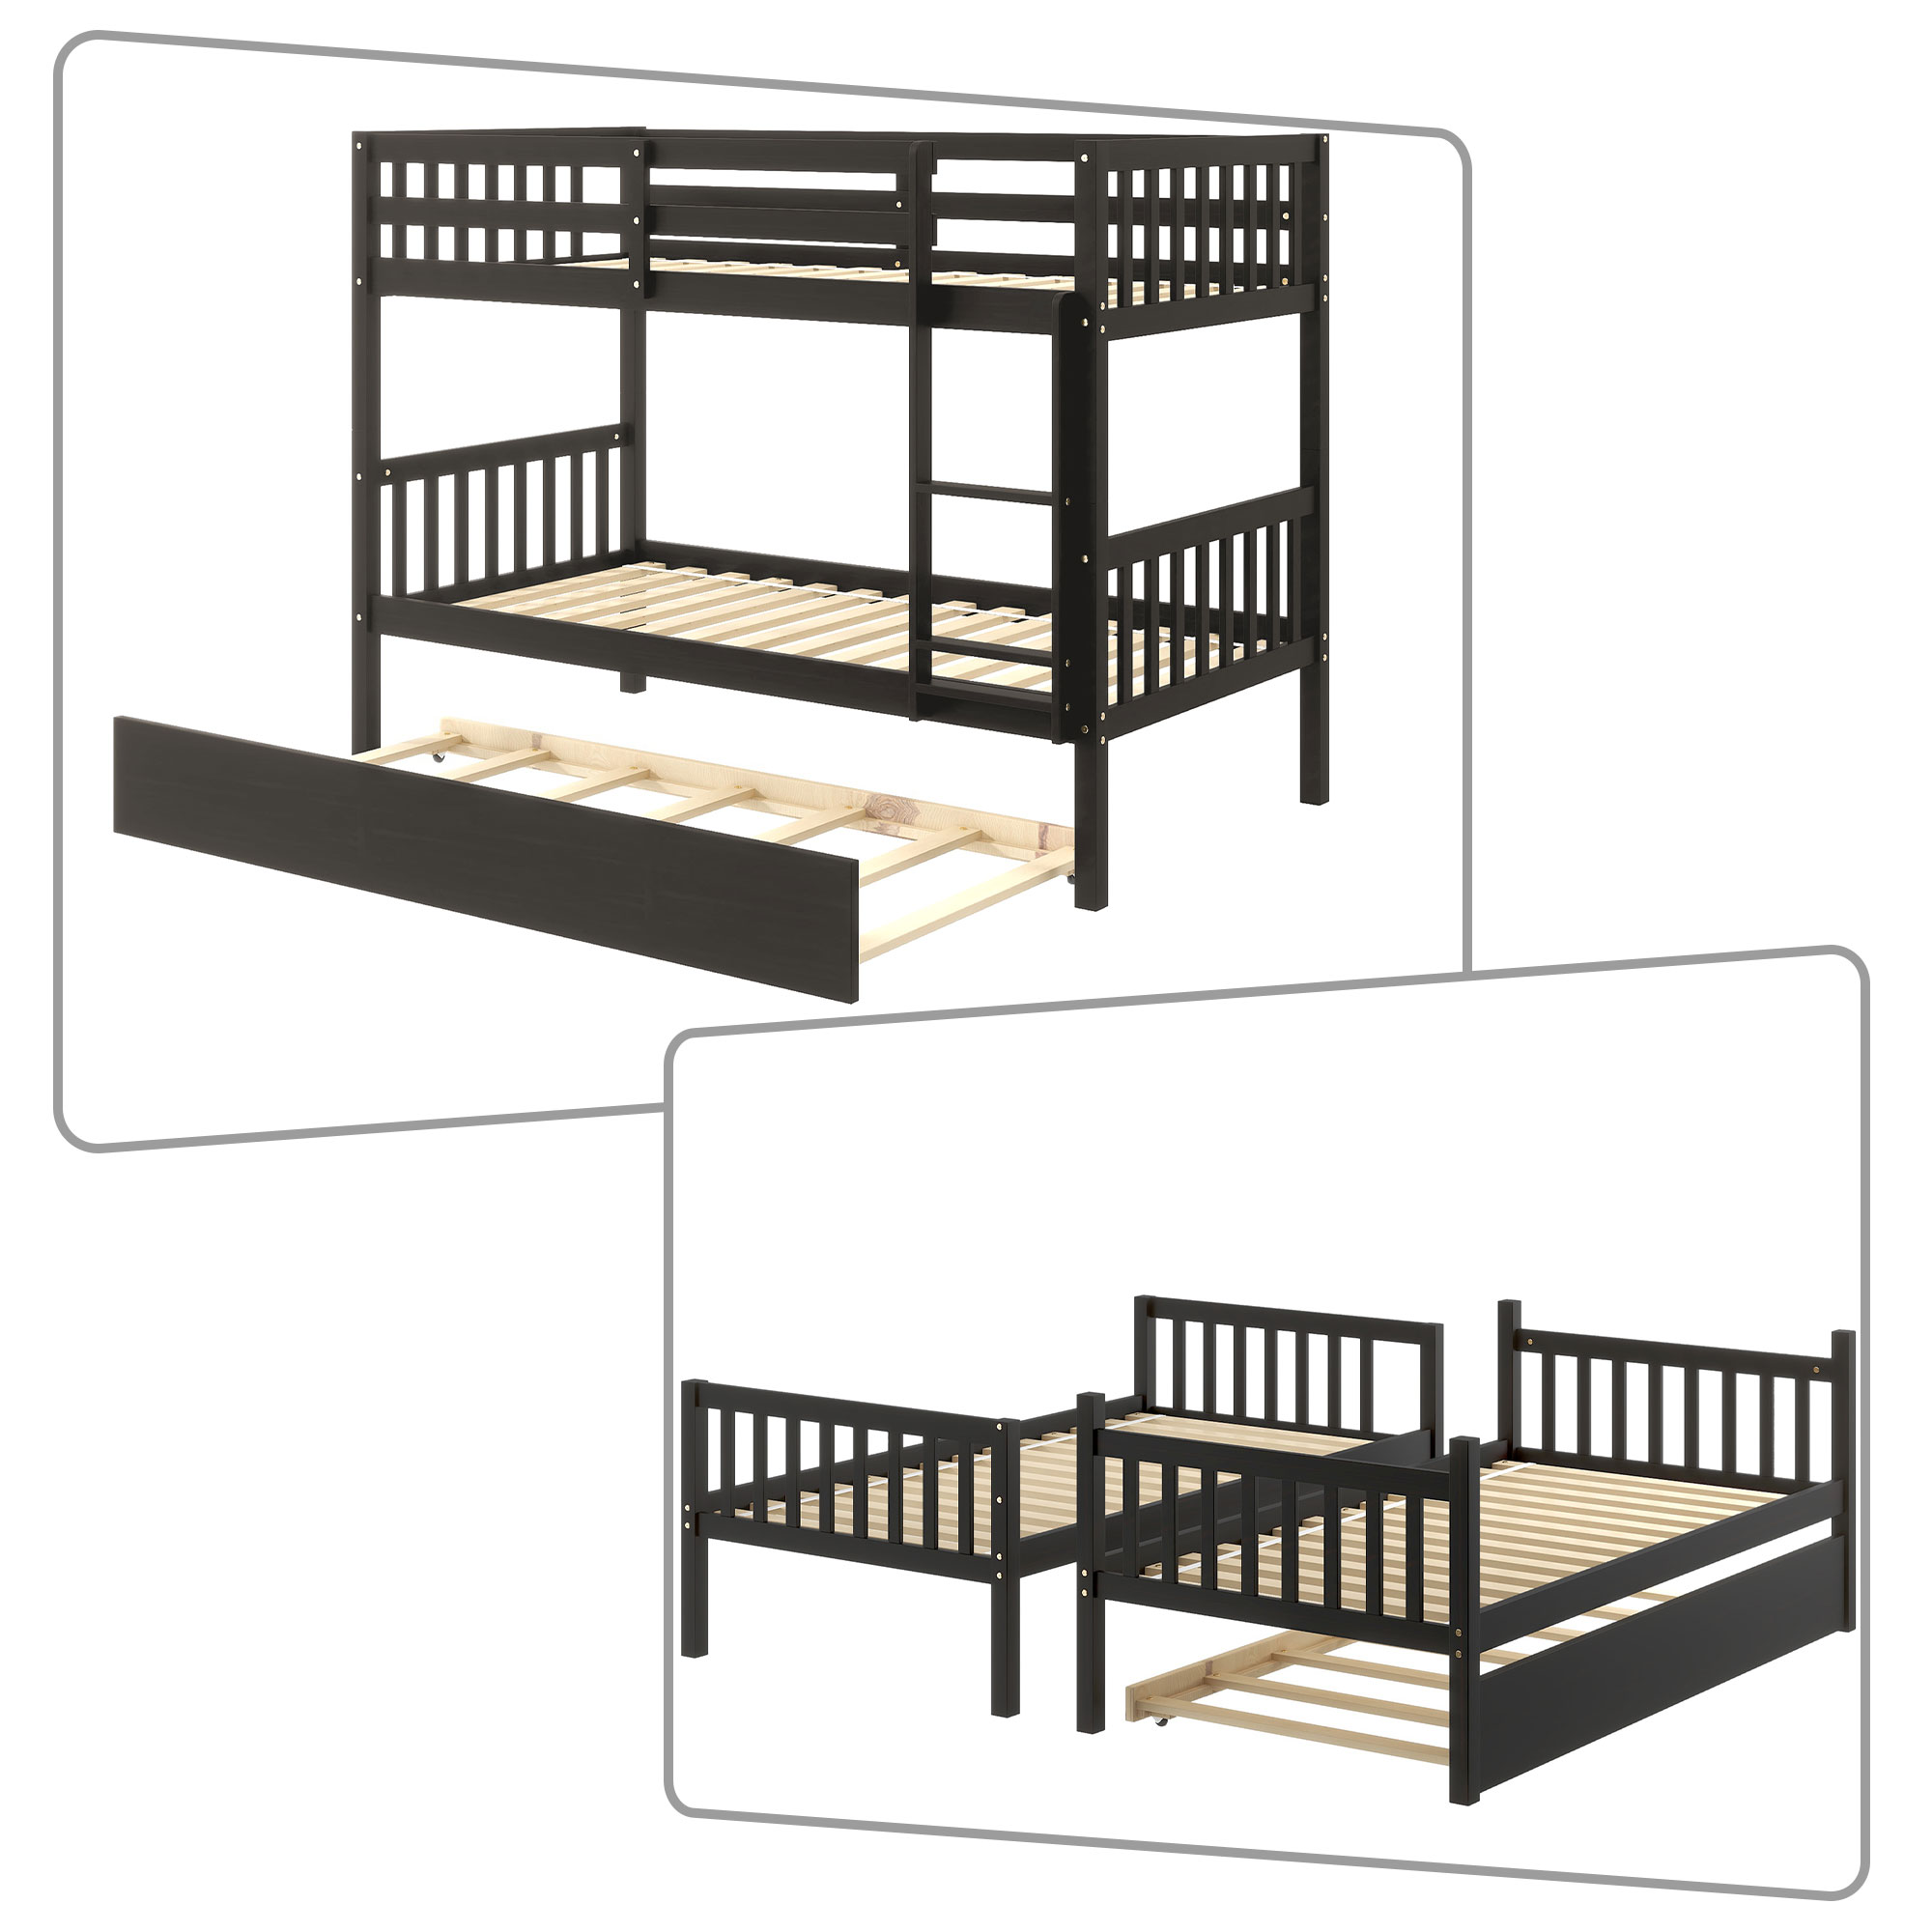 Modern and Minimalist Style Twin Size Wooden Bunk Bed with Ladder and A Trundle, Espresso - image 2 of 5